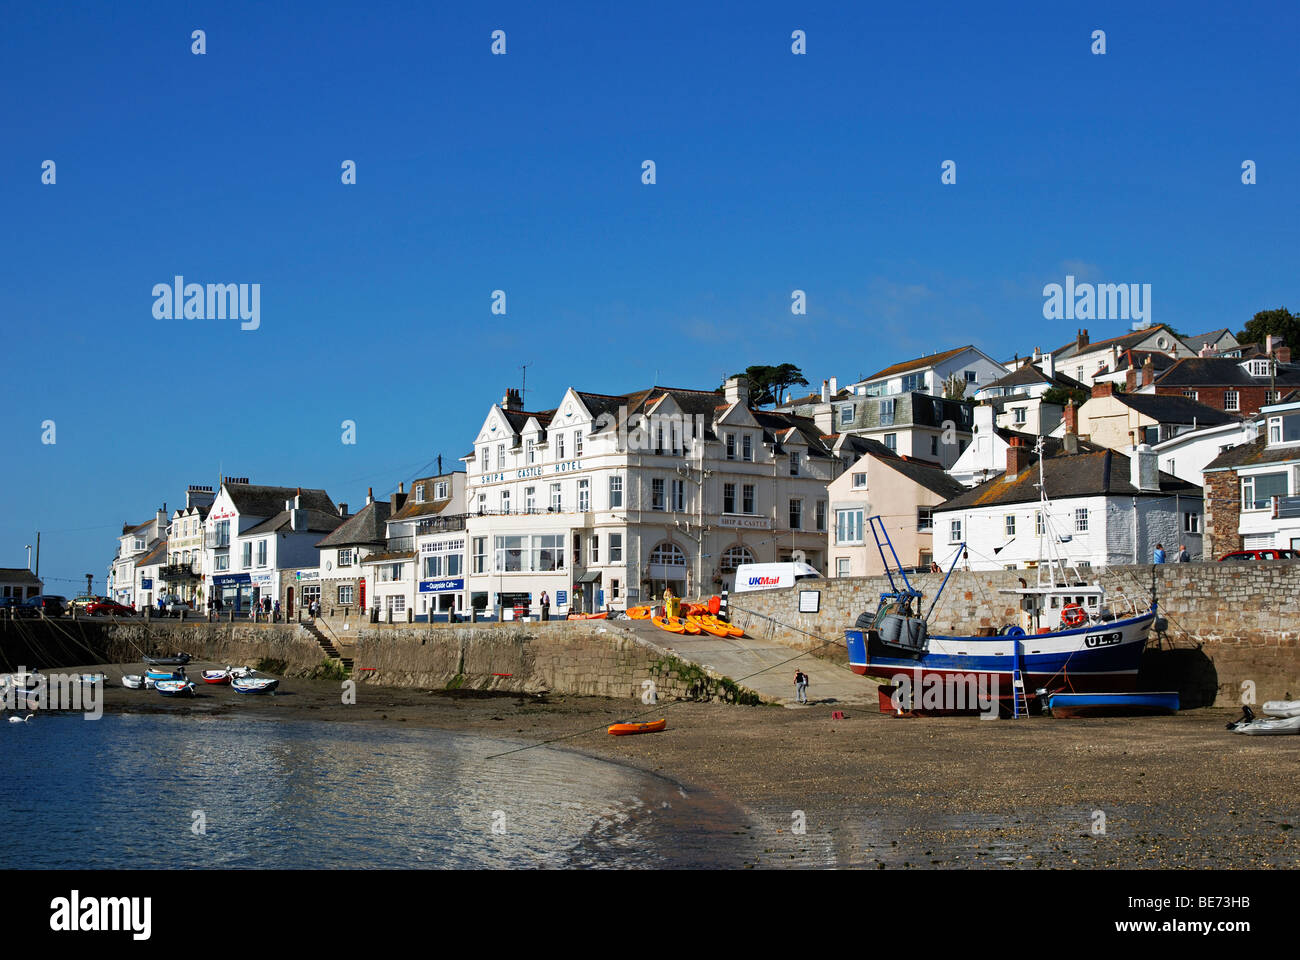 St mawes.harbour, Cornwall, uk Banque D'Images